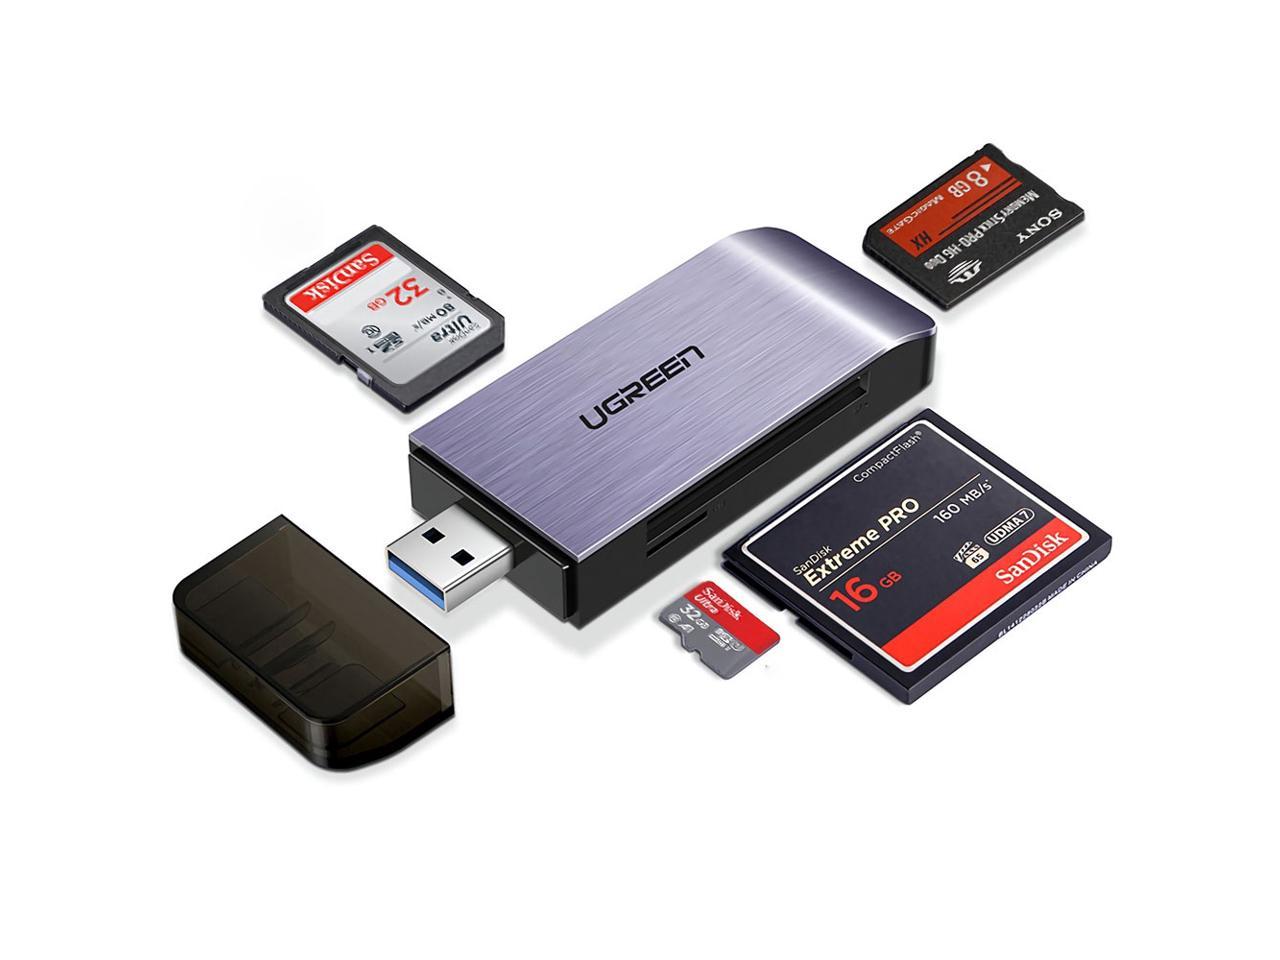 UGreen USB 3.0 Card Reader micro SD TF SD CF MS Card Slots transfer rates up to 5Gbps hot swapping support compatible with windows Mac OS and linux CM180